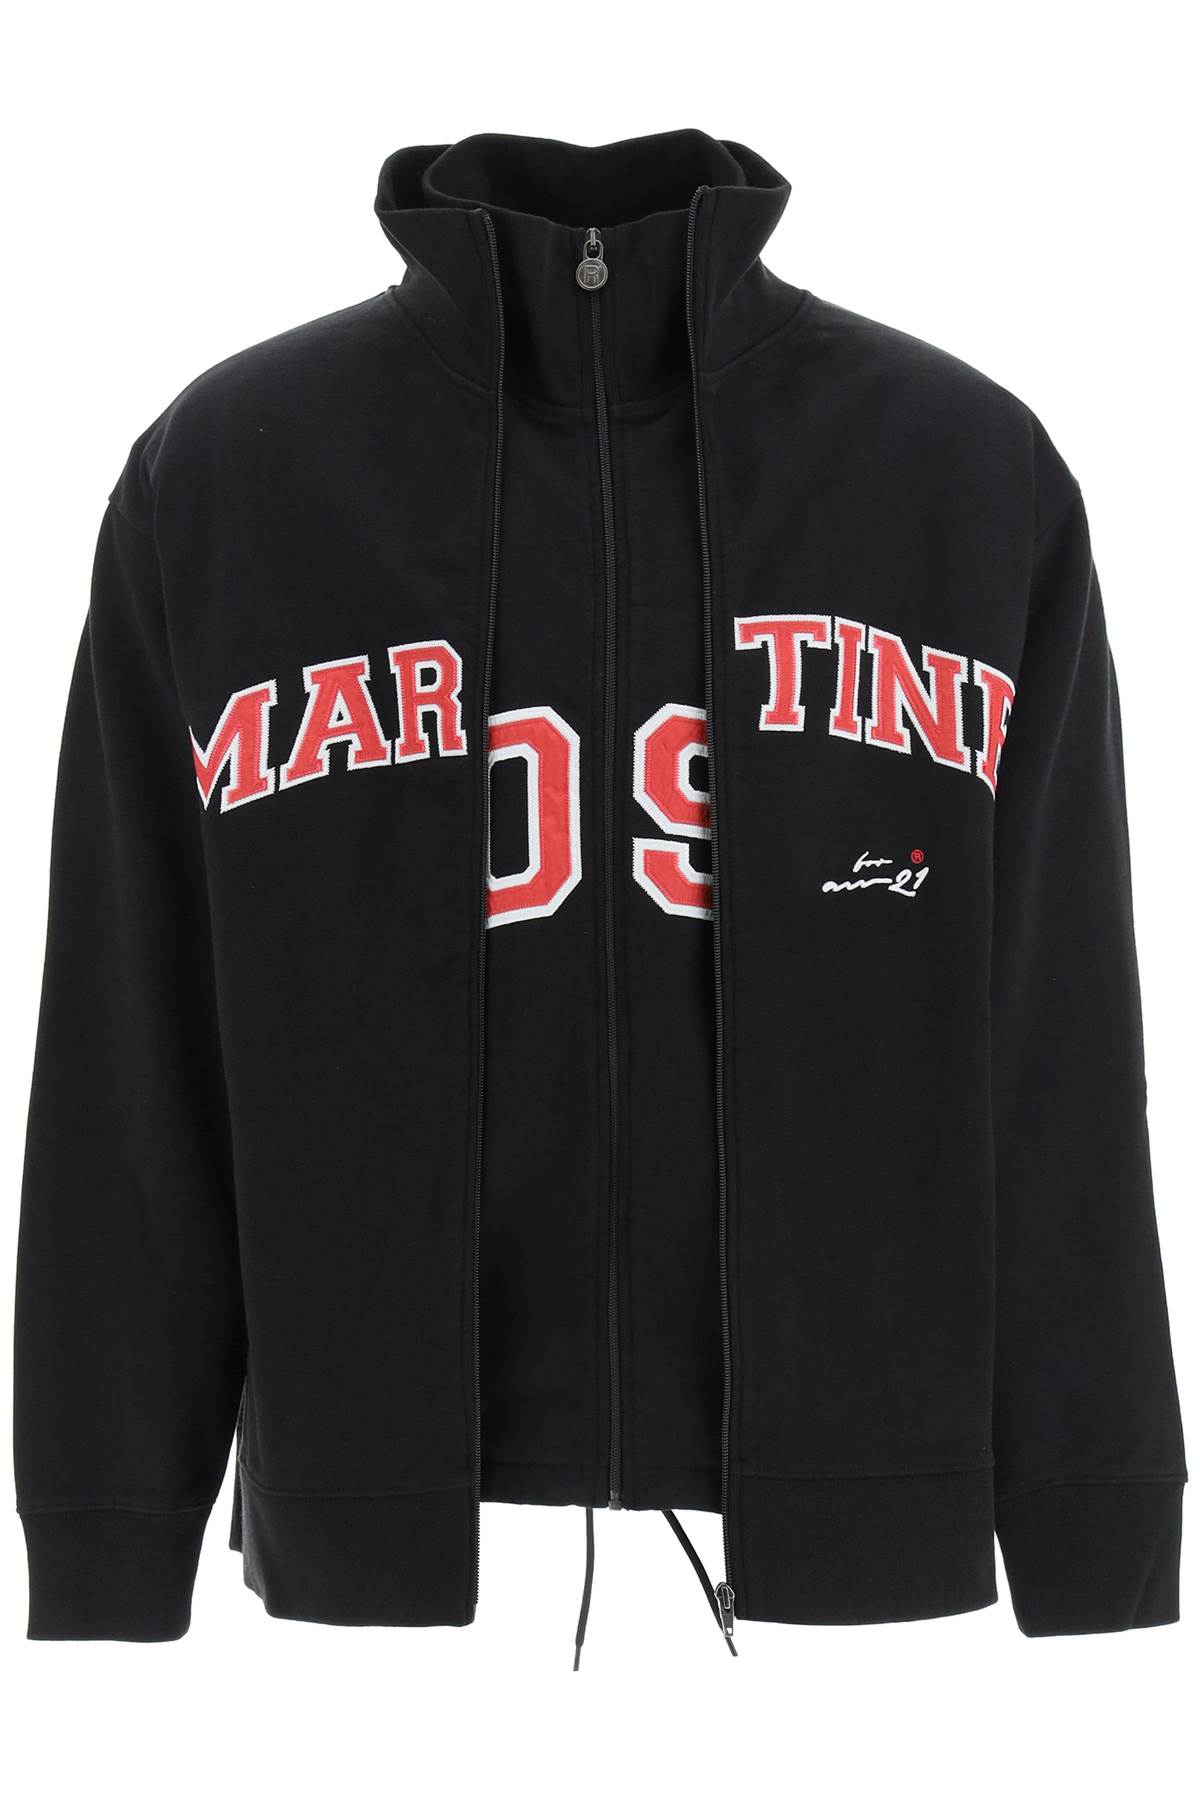 Martine Rose Two In One Track Jacket